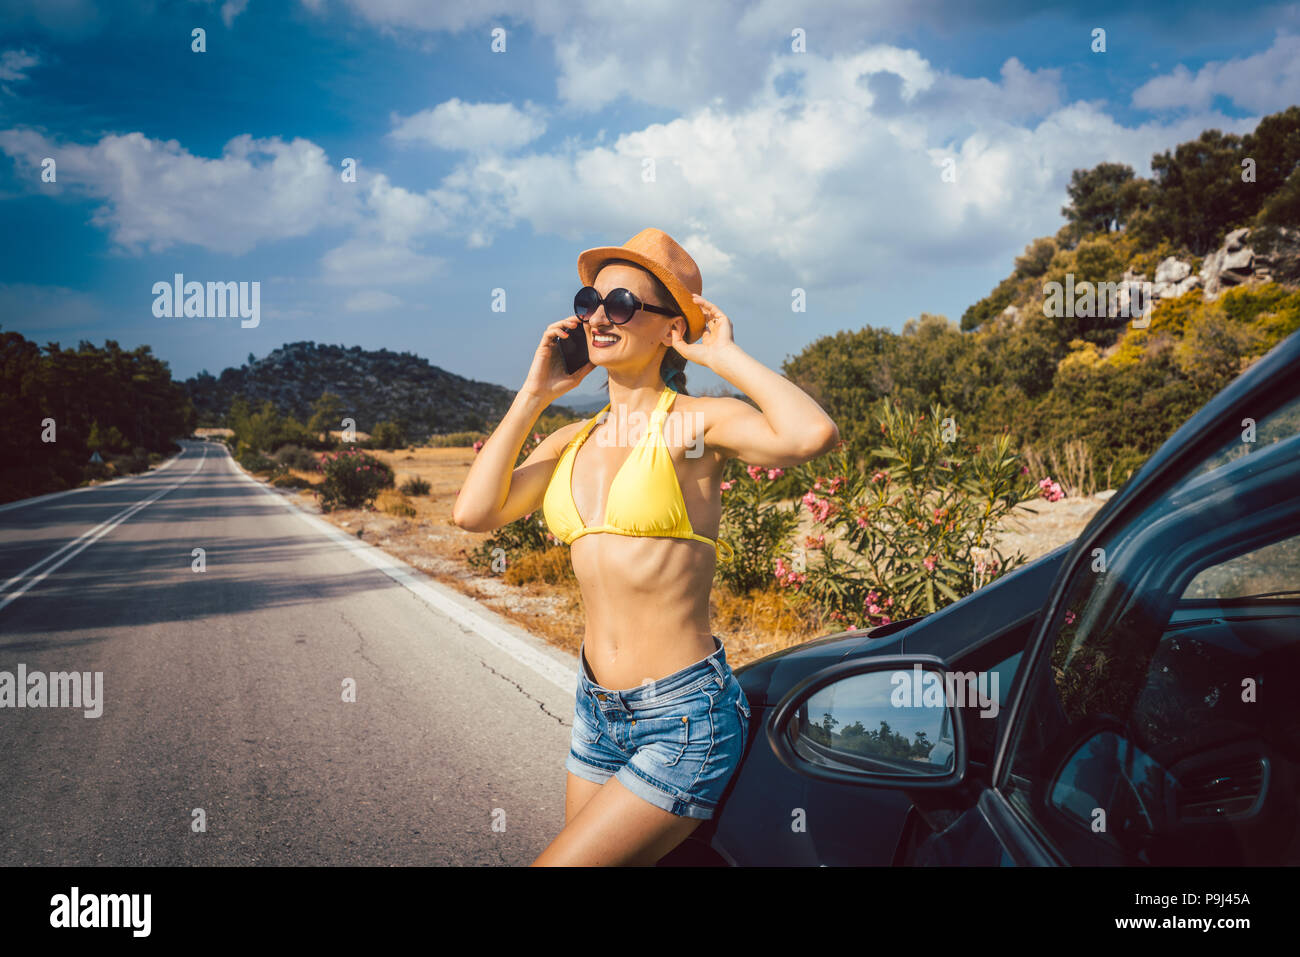 Woman using phone in her vacation Stock Photo